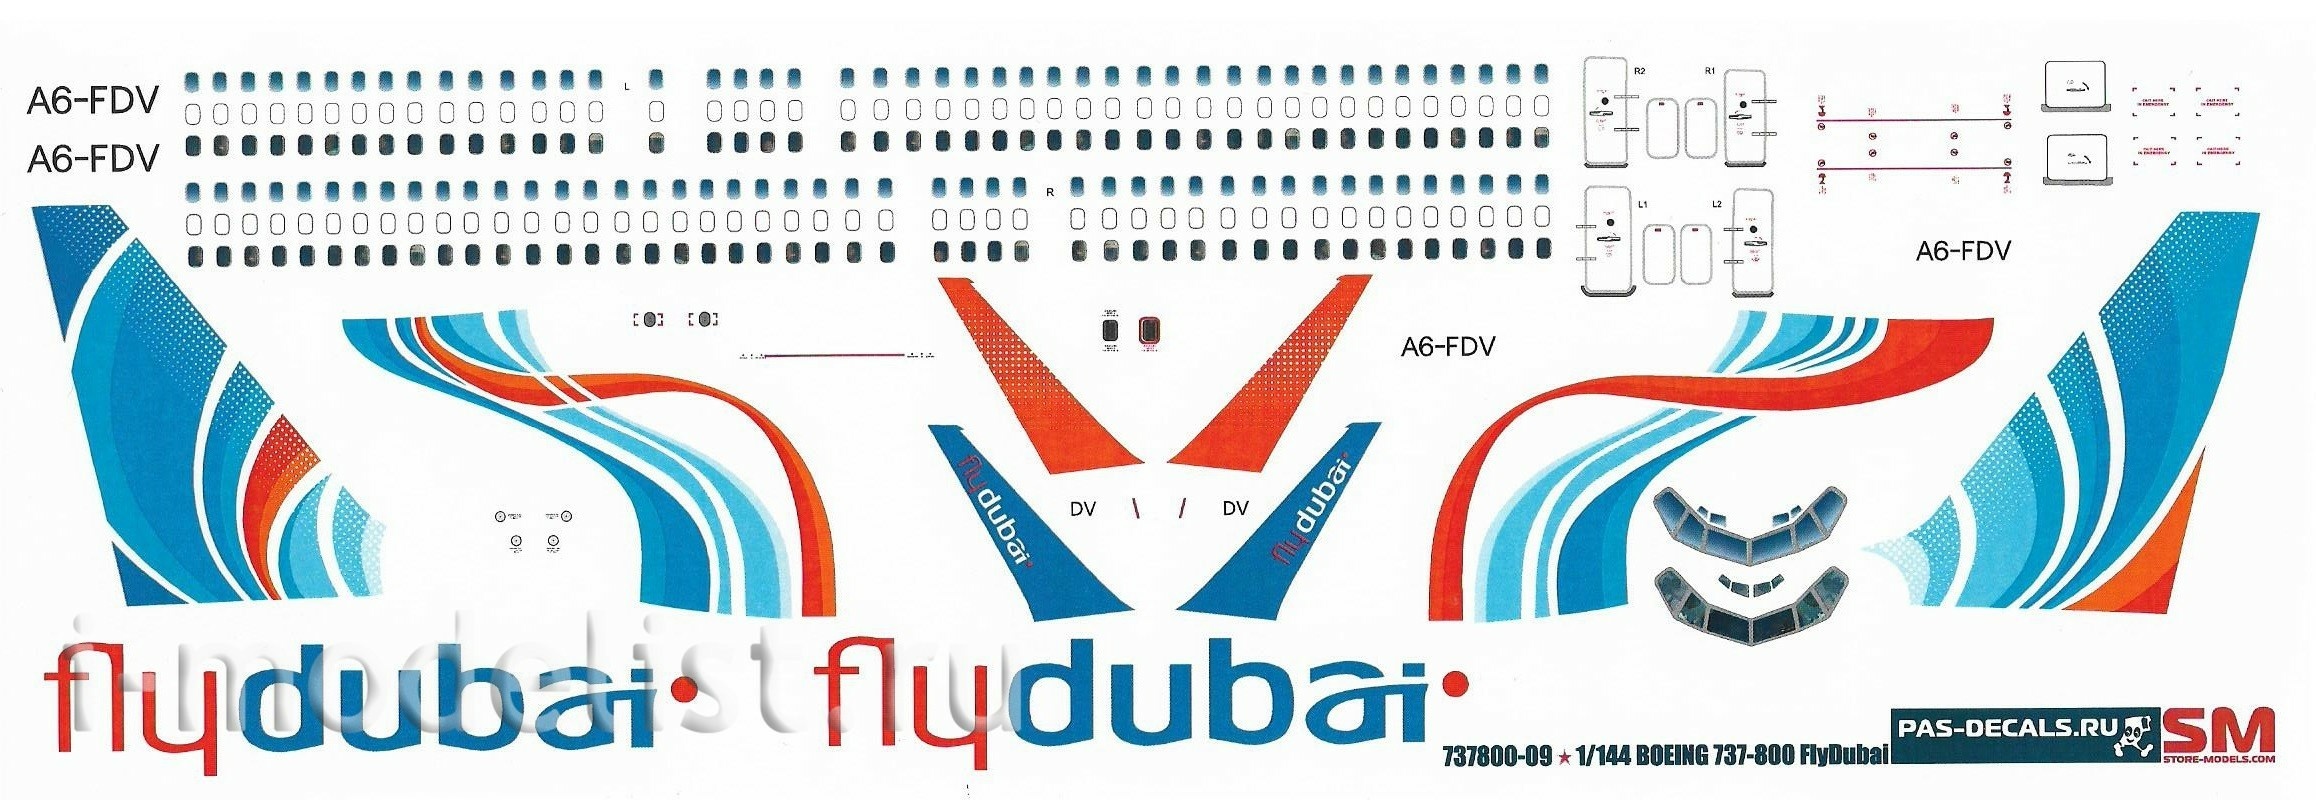 737800-09 PasDecals Decal 1/144 Scales at Boeng 737-800 Fly Dubai